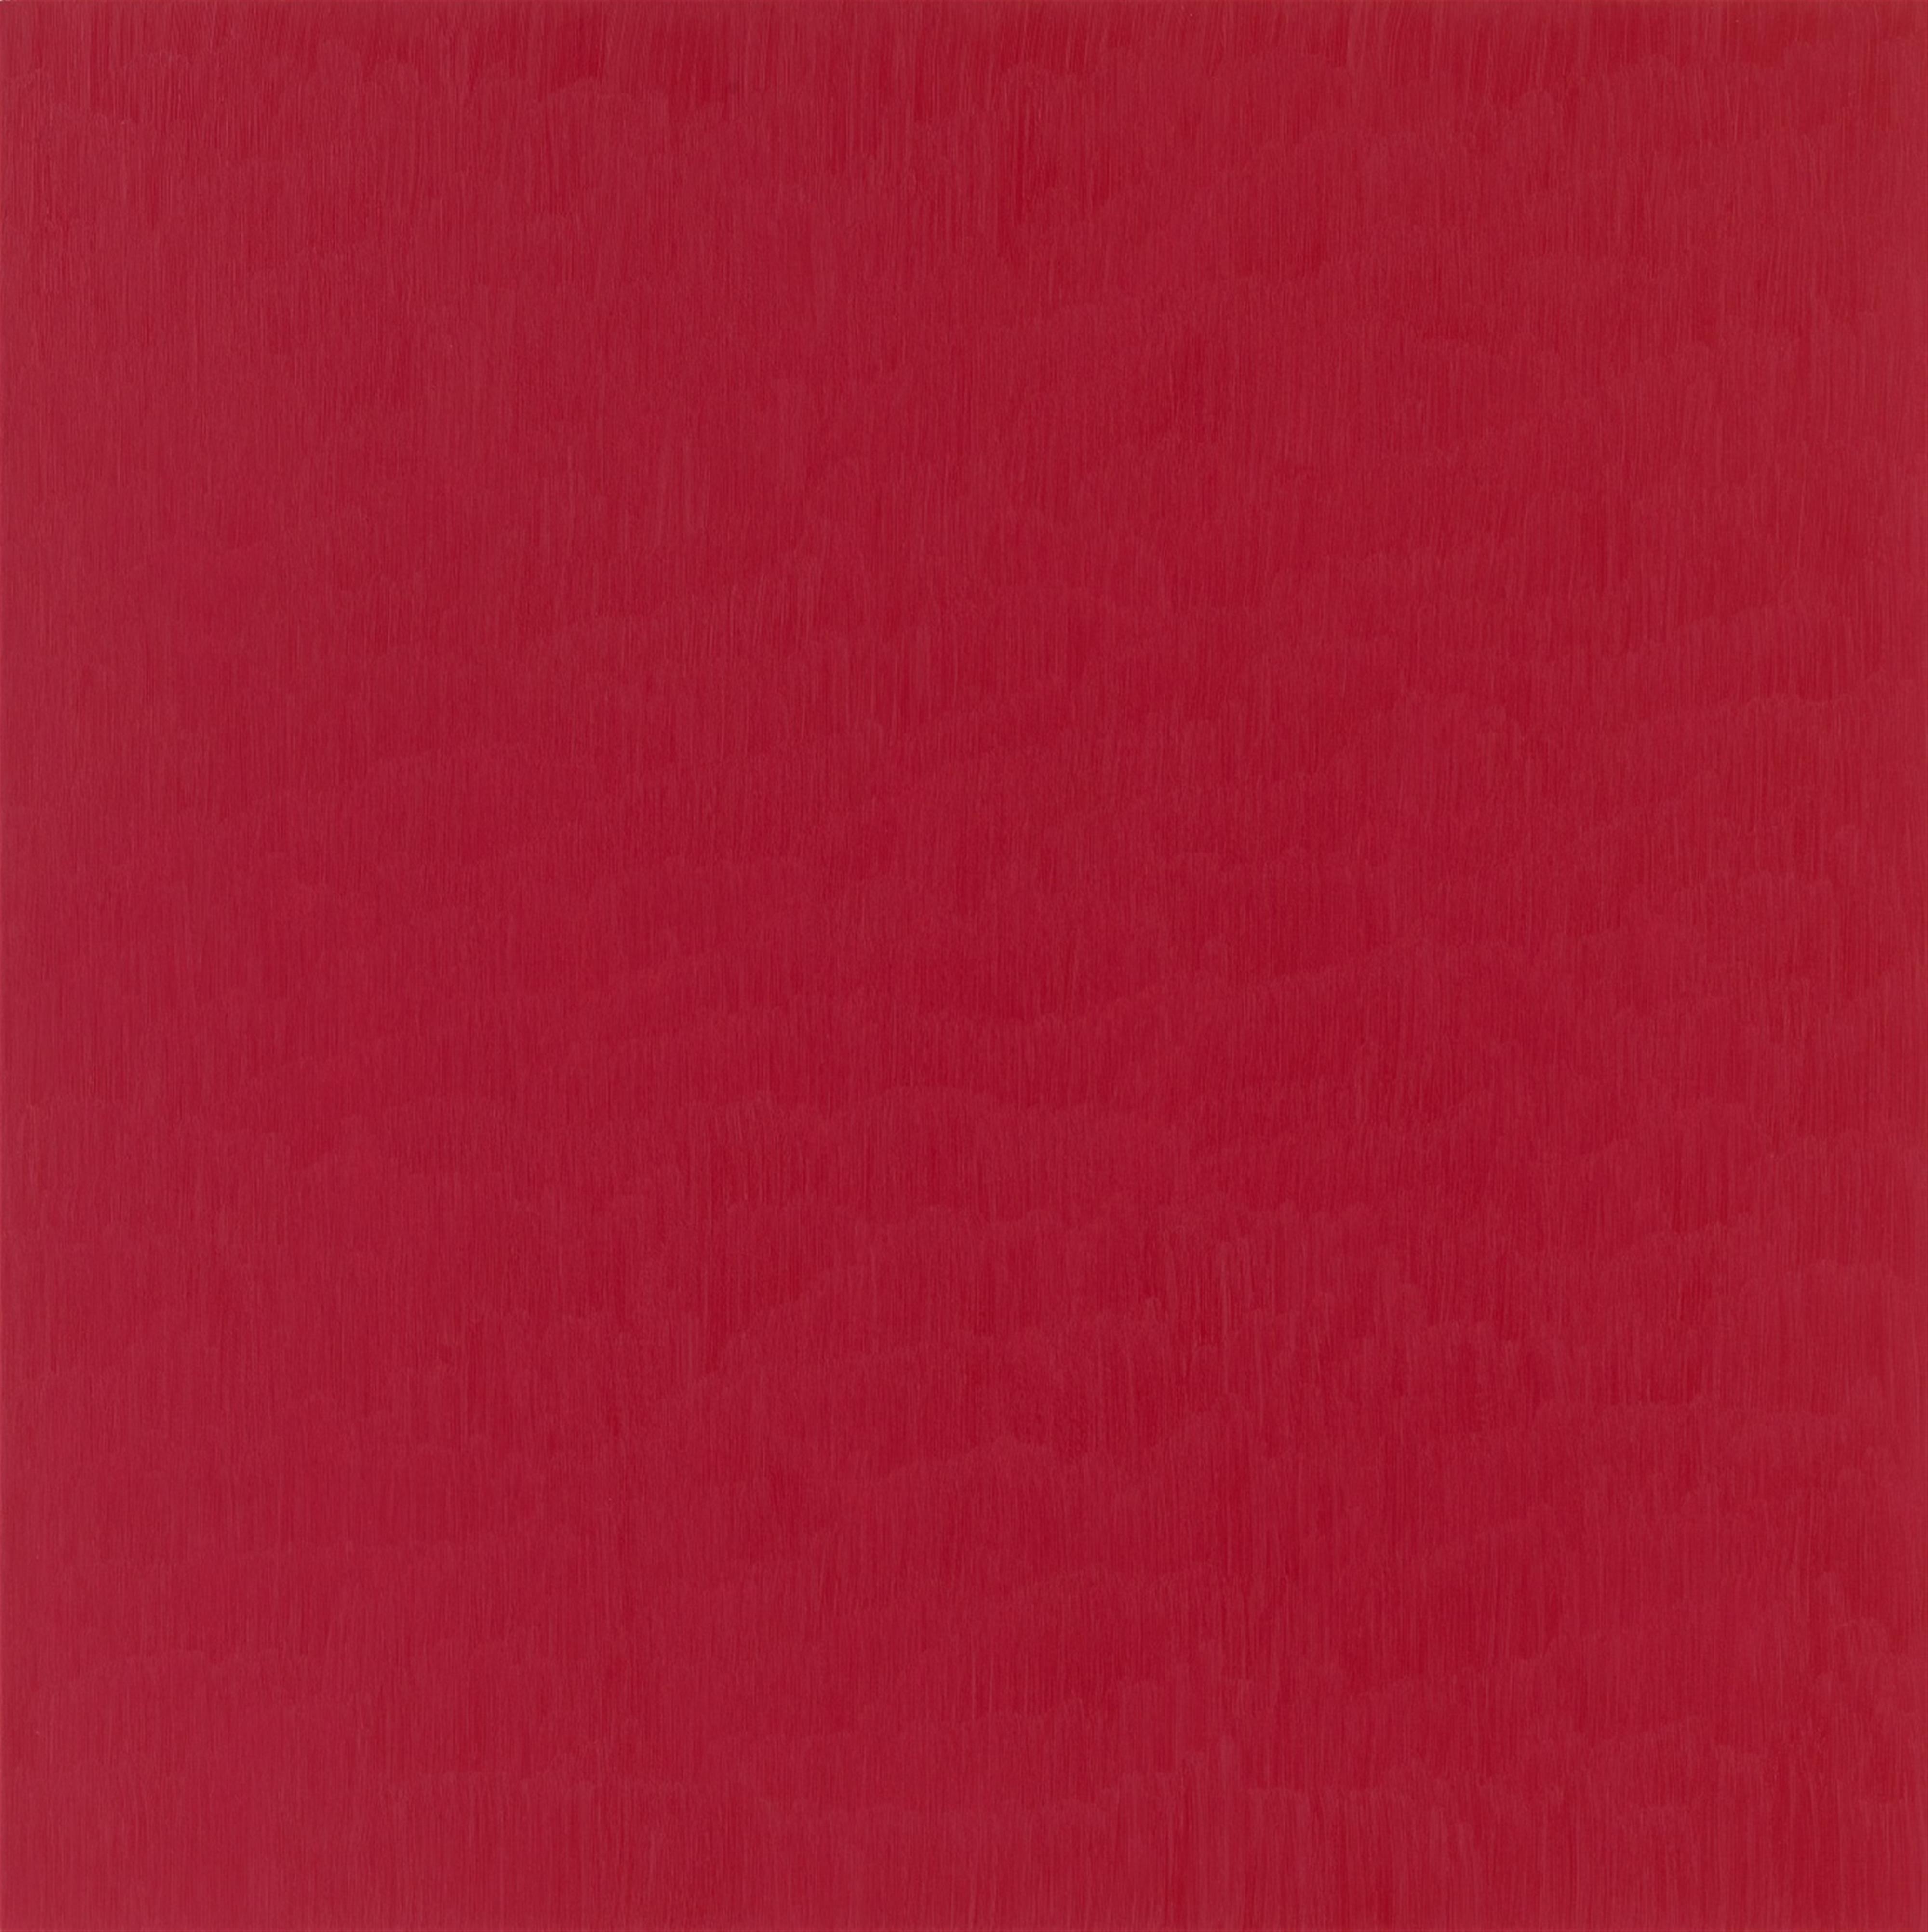 Marcia Hafif - Permanent Red Dark (A) - image-1